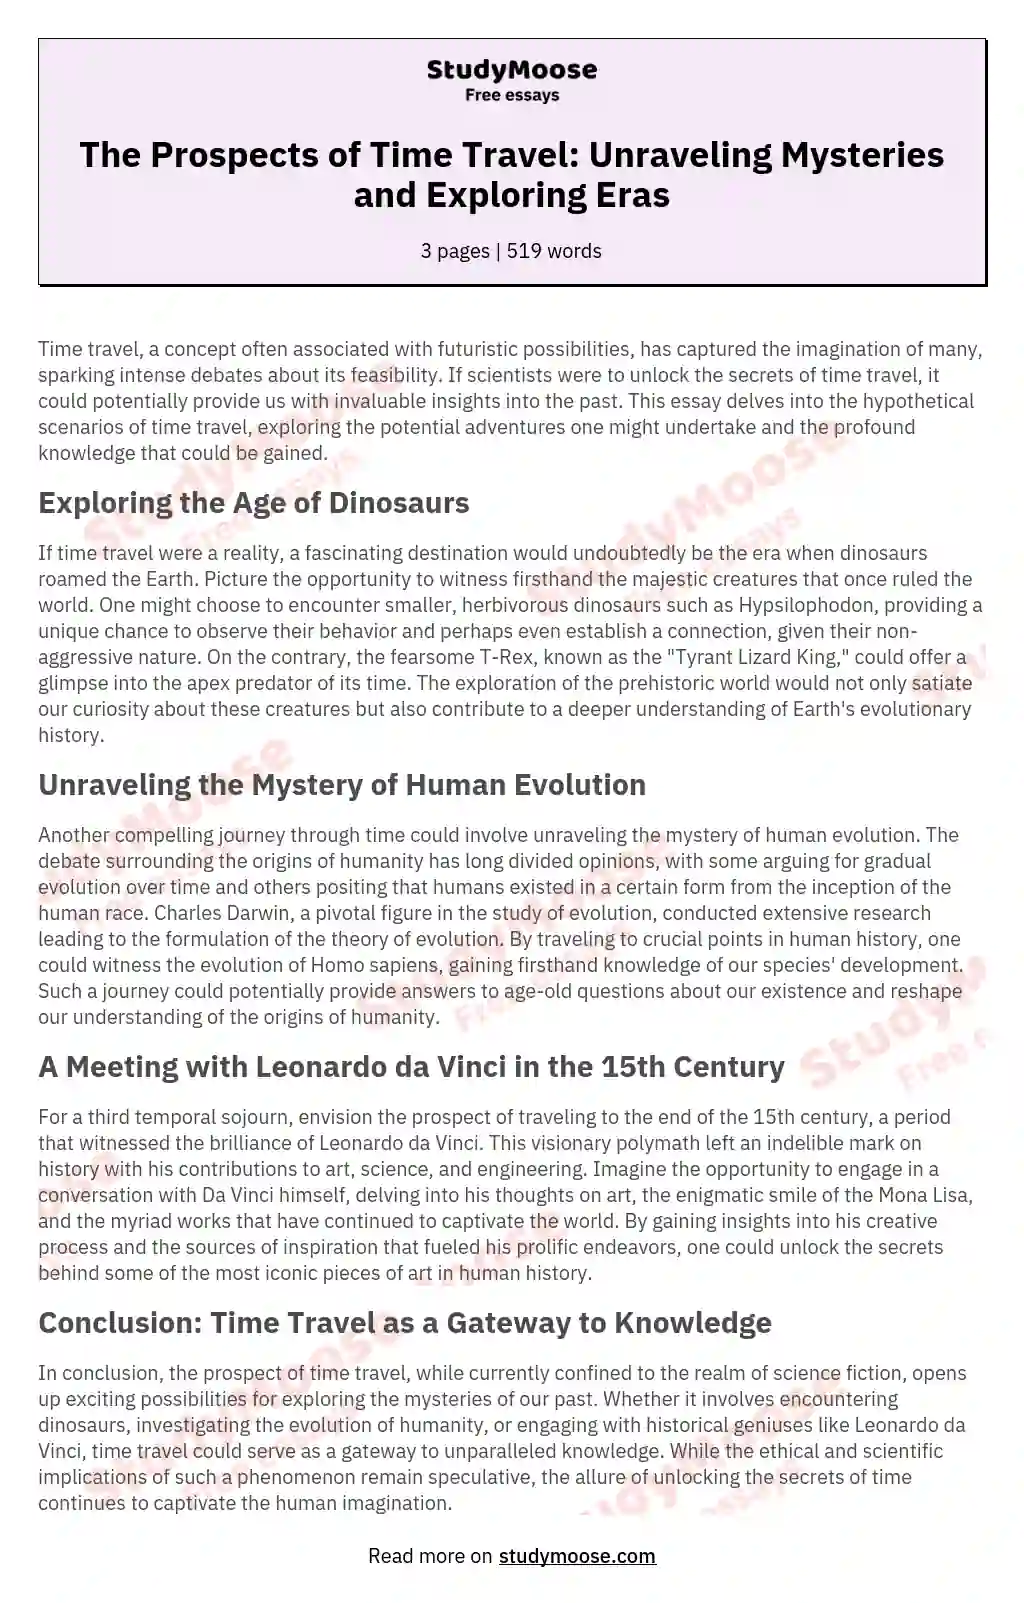 The Prospects of Time Travel: Unraveling Mysteries and Exploring Eras essay